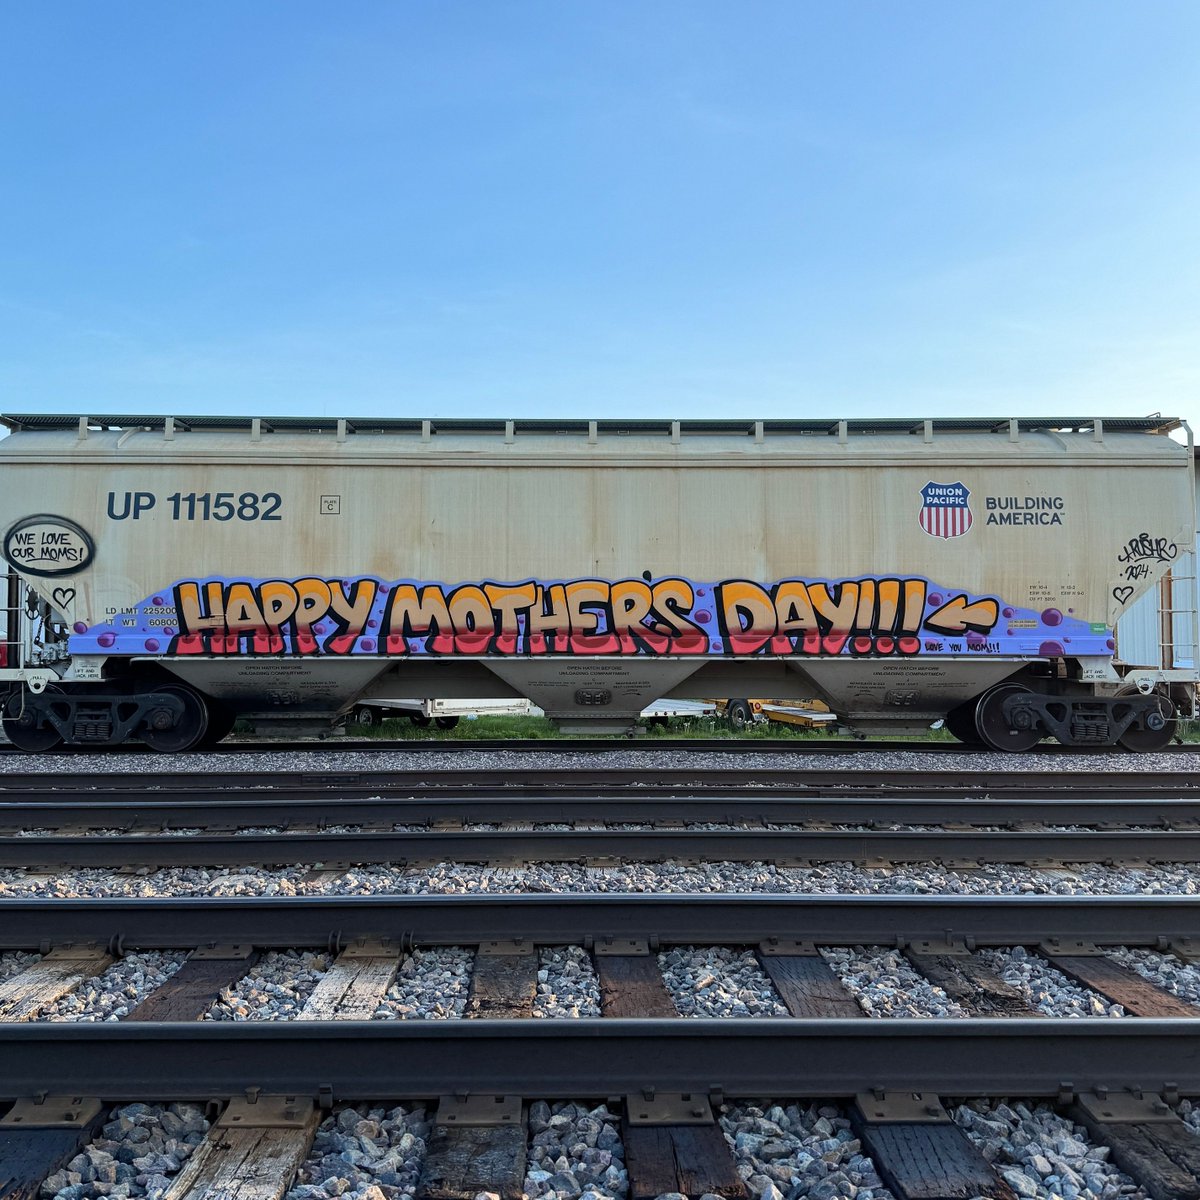 For all the moms out there! @4re_you_sure⁠ ⁠ #bombingscience #graff #graffiti #mothersday #mothersdaygraffiti #freight #freighttraingraffiti #art #spraypaint⁠